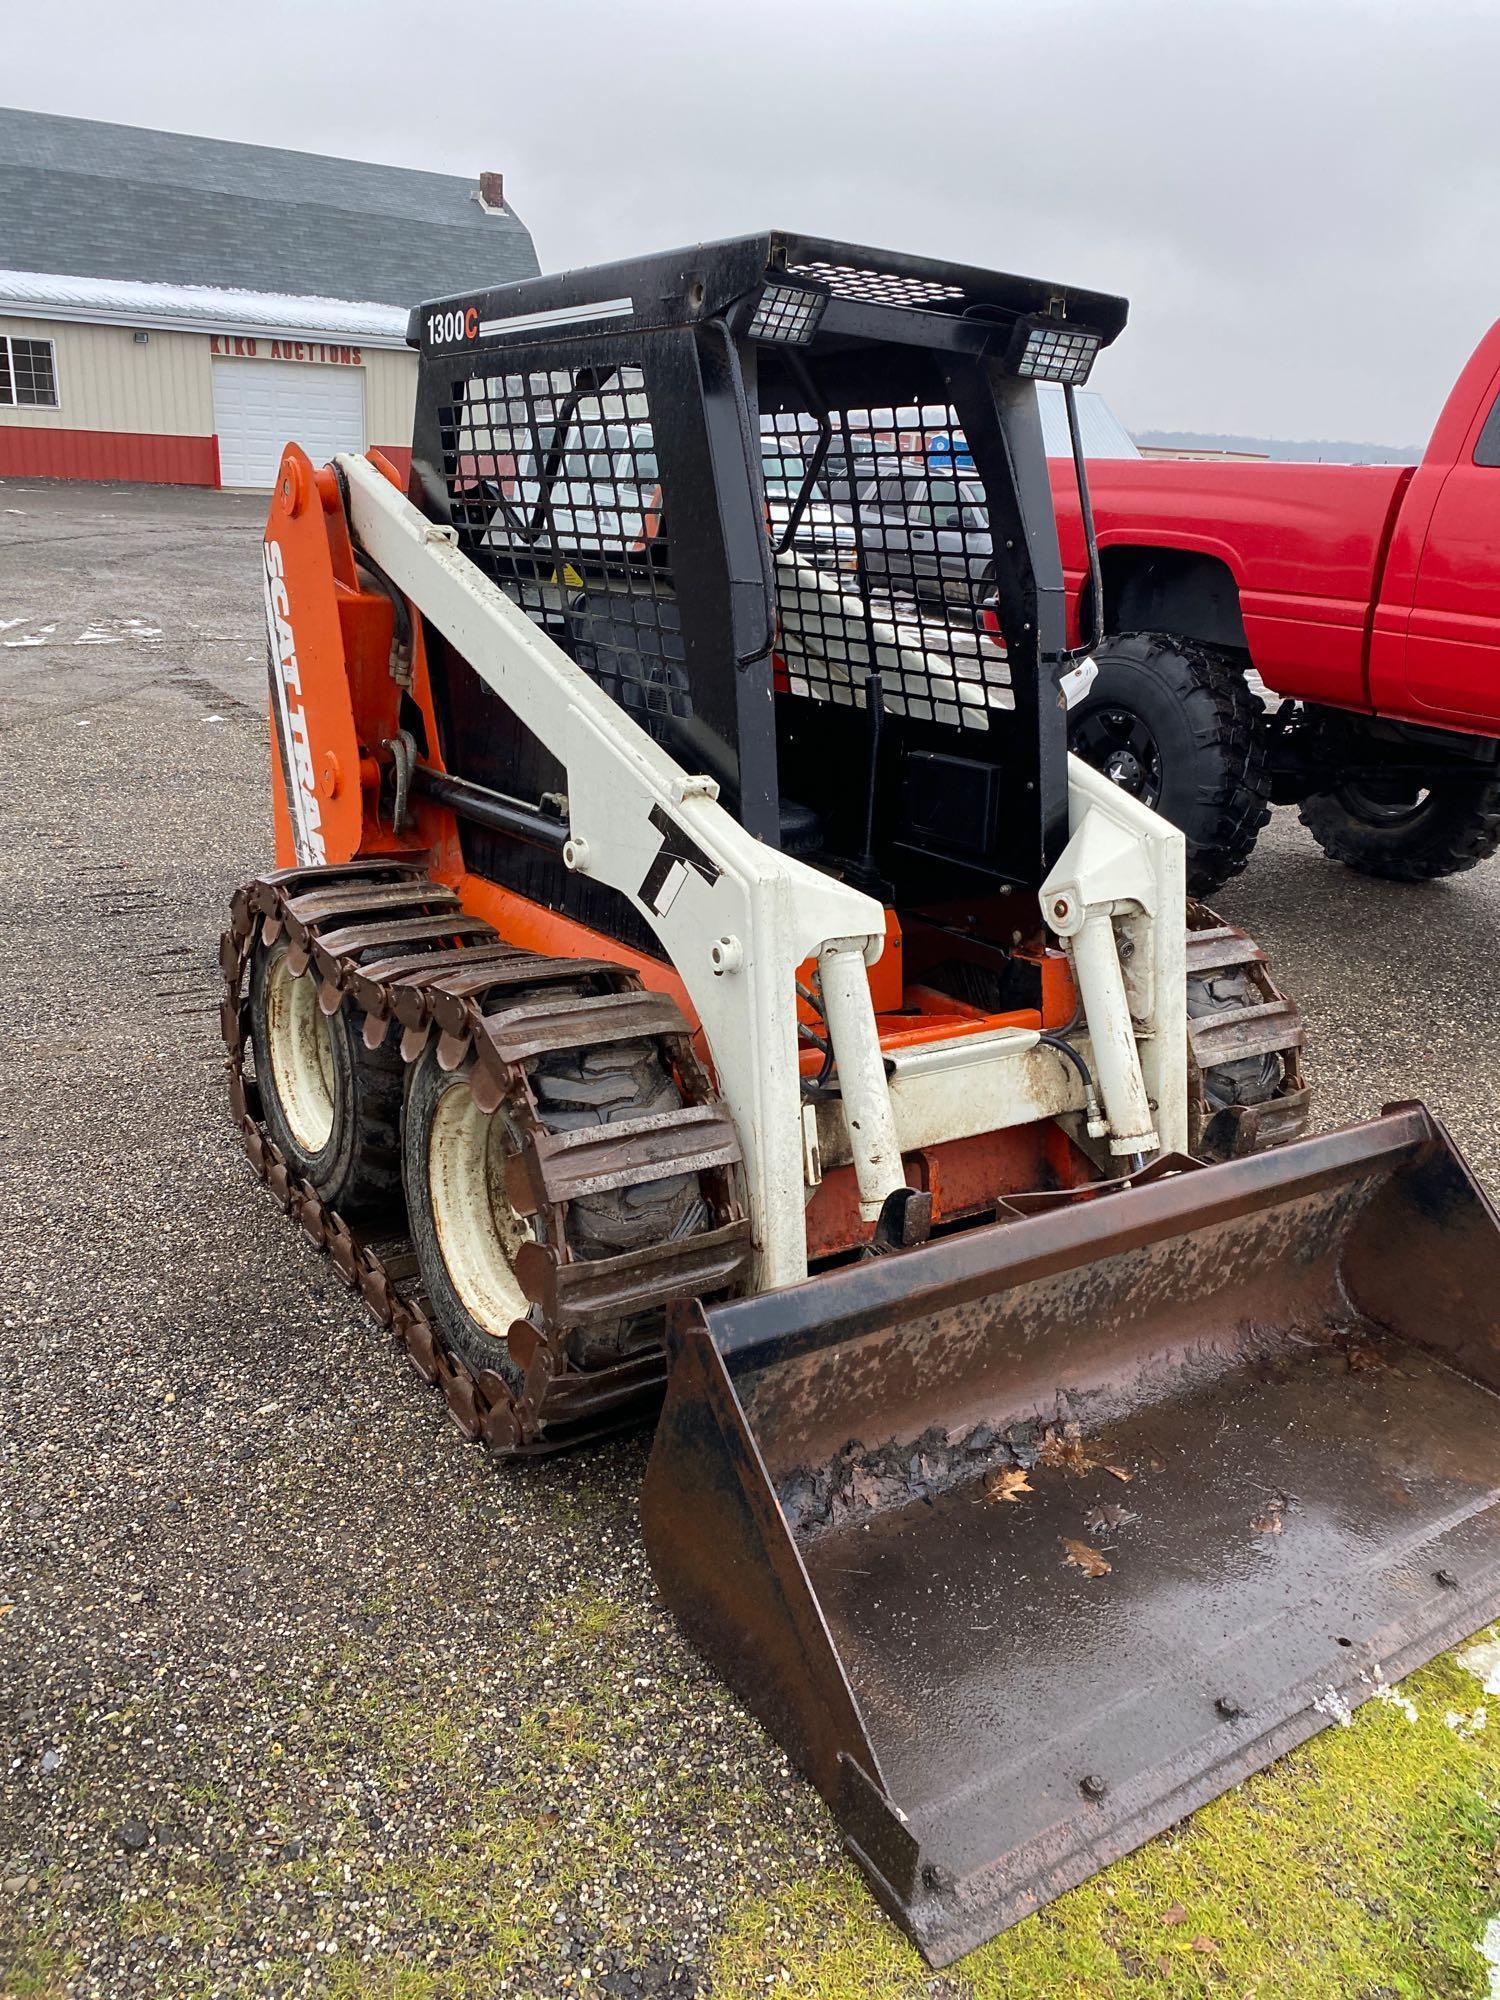 Scat Trak 1300C skid loader with tracks, 1010 hours, Perkins diesel engine, very good condition